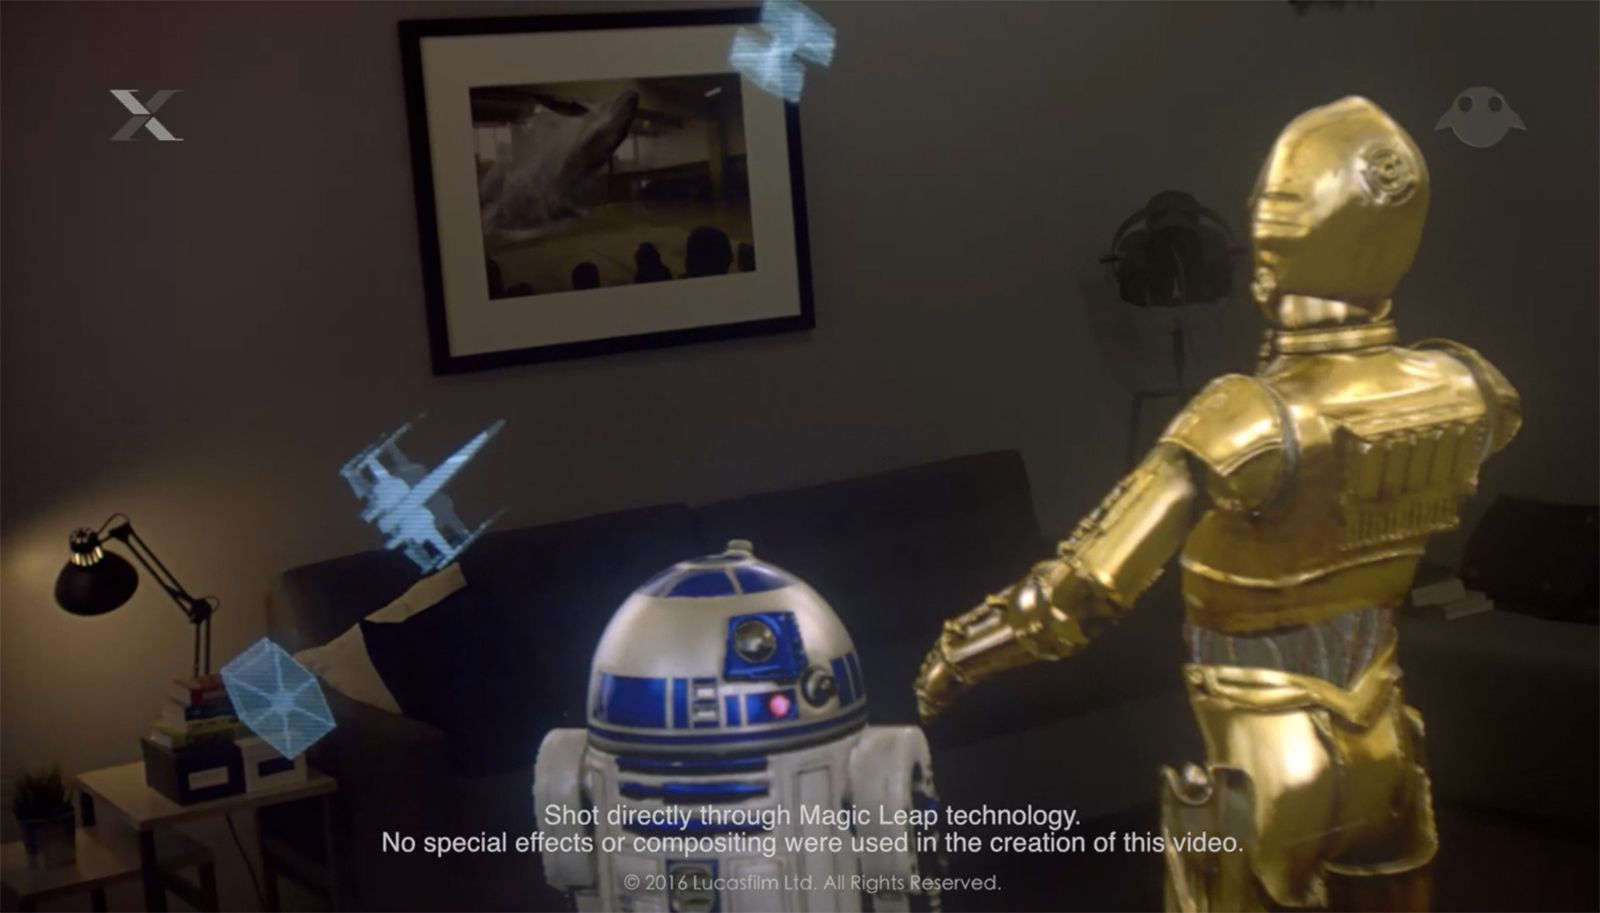 stunning magic leap star wars team up brings c3p0 and r2 d2 into augmented reality image 1